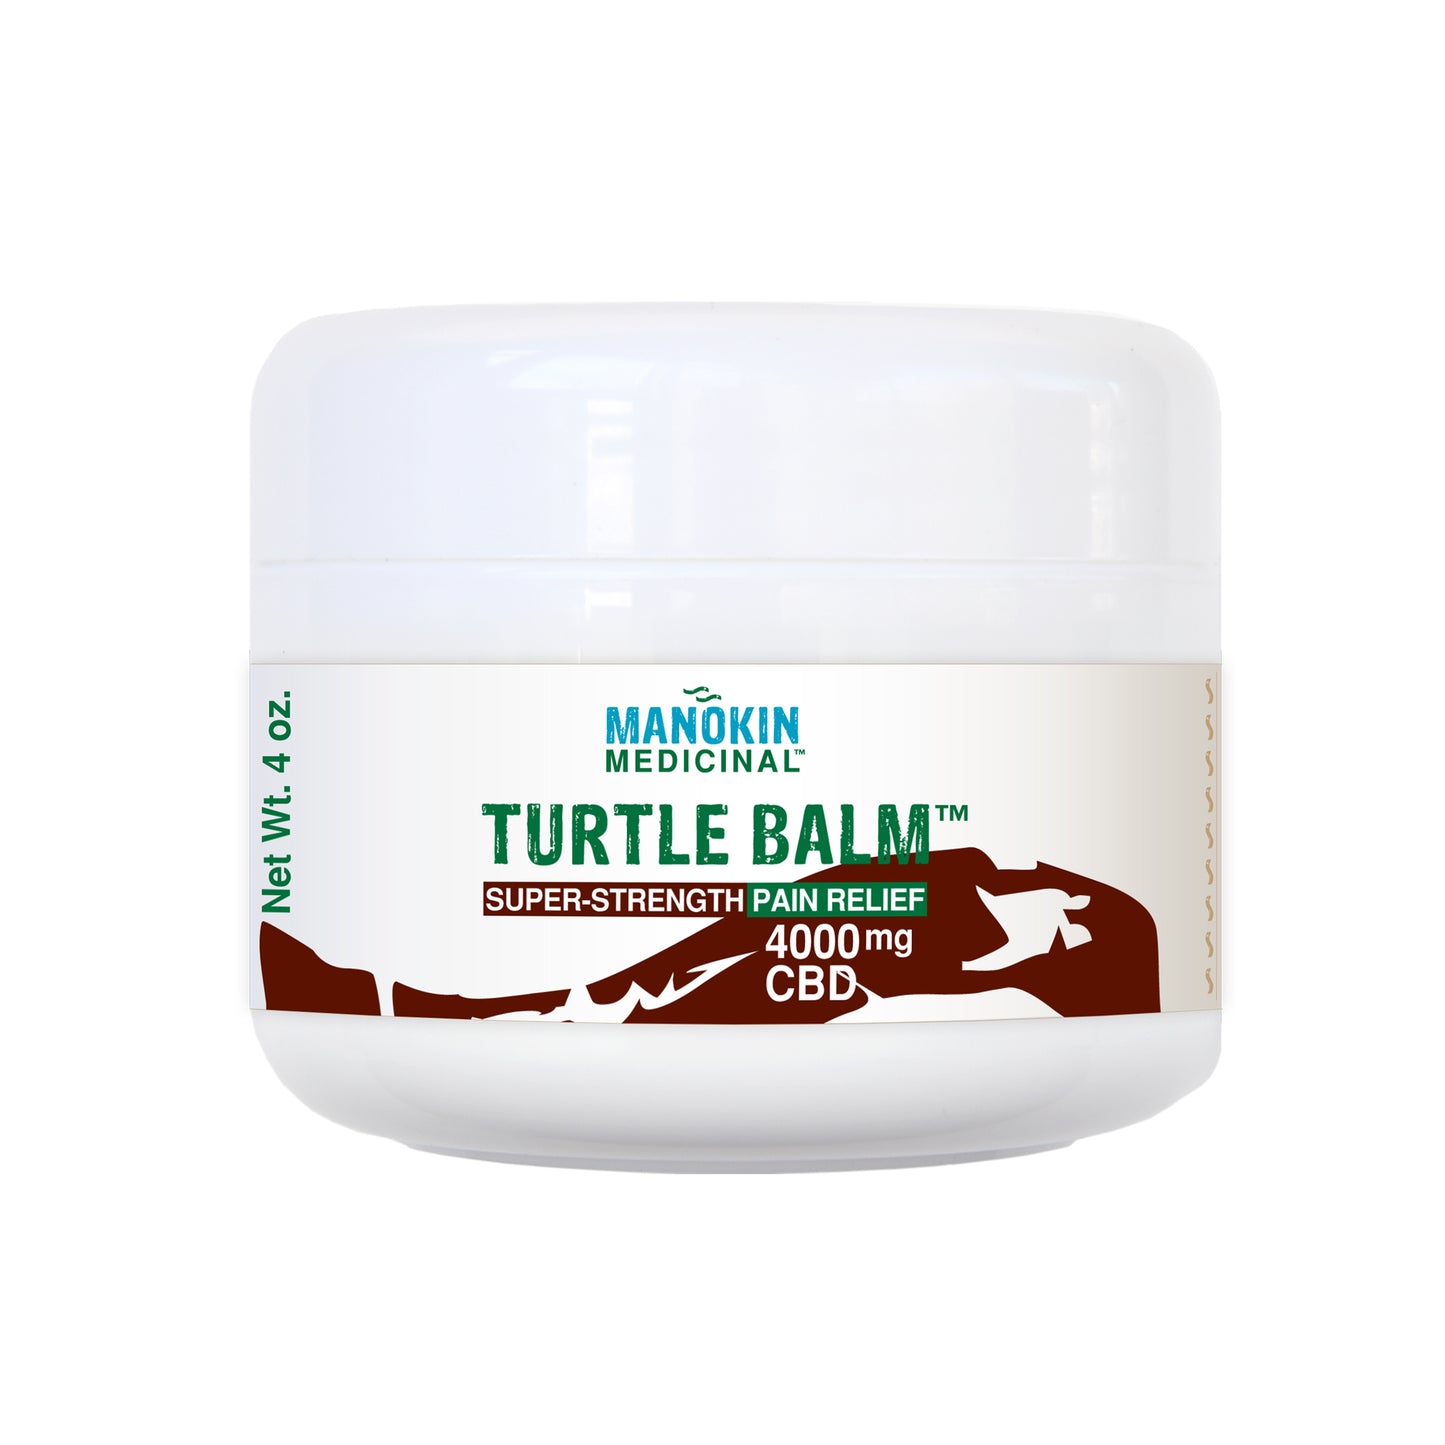 Turtle Balm® 4000mg Super Strength 4 oz. FREE SHIPPING limited time only!